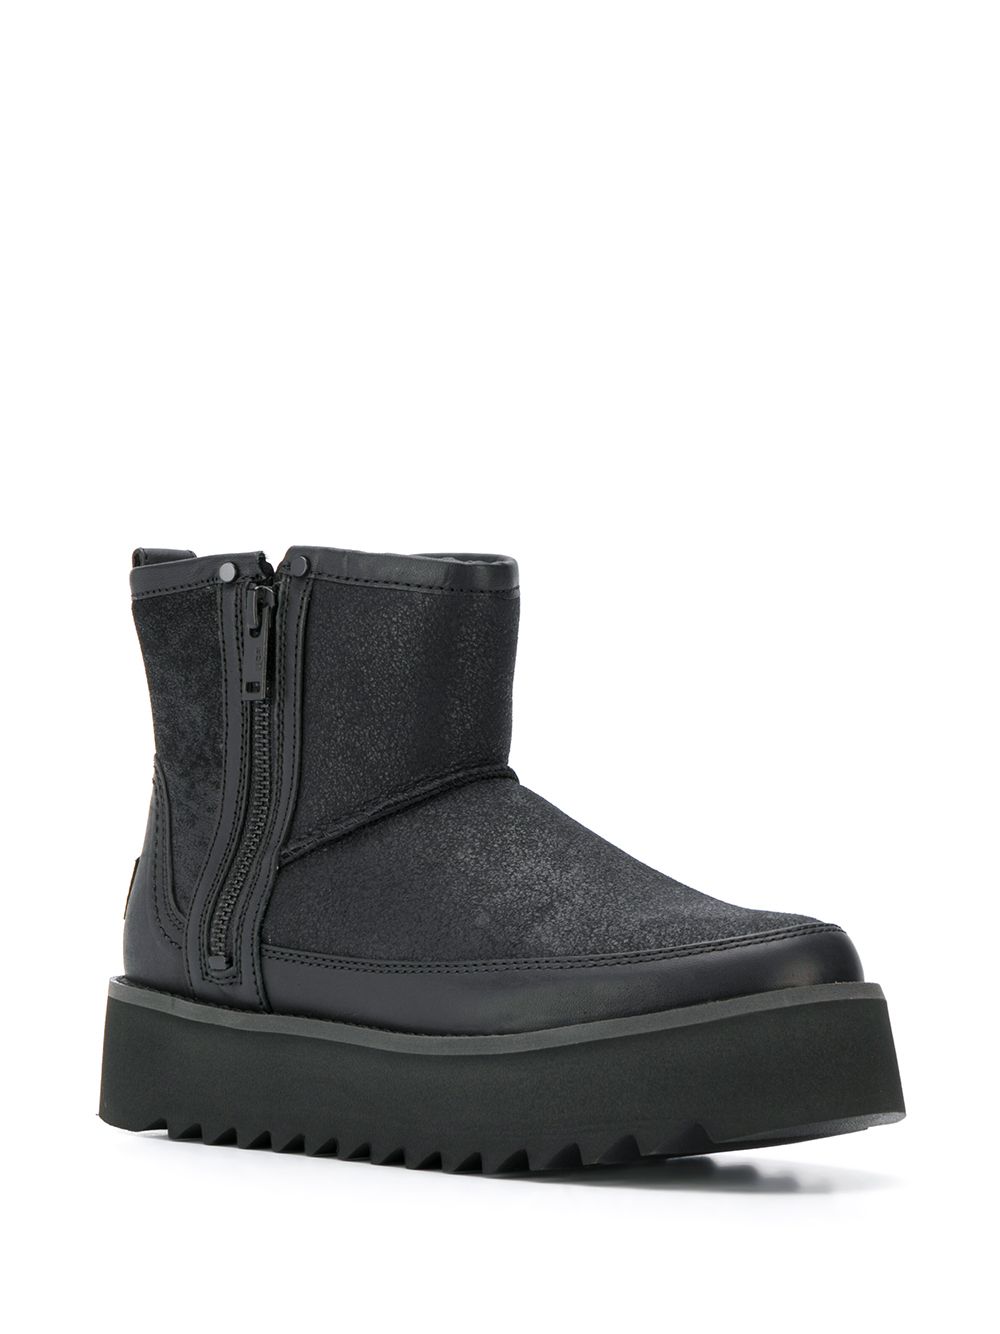 all black ugg boots